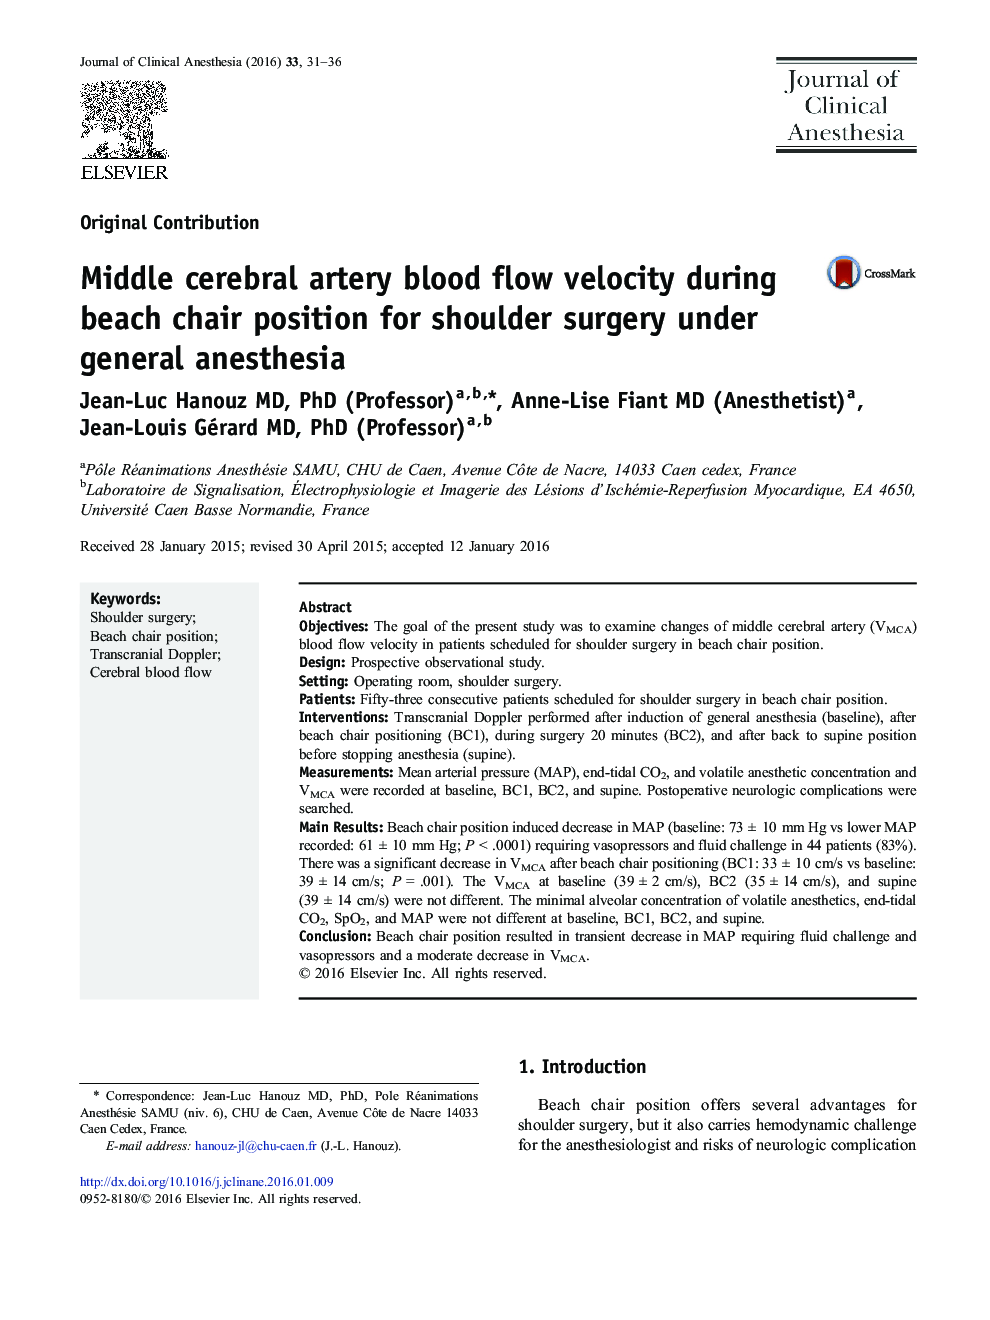 Middle cerebral artery blood flow velocity during beach chair position for shoulder surgery under general anesthesia